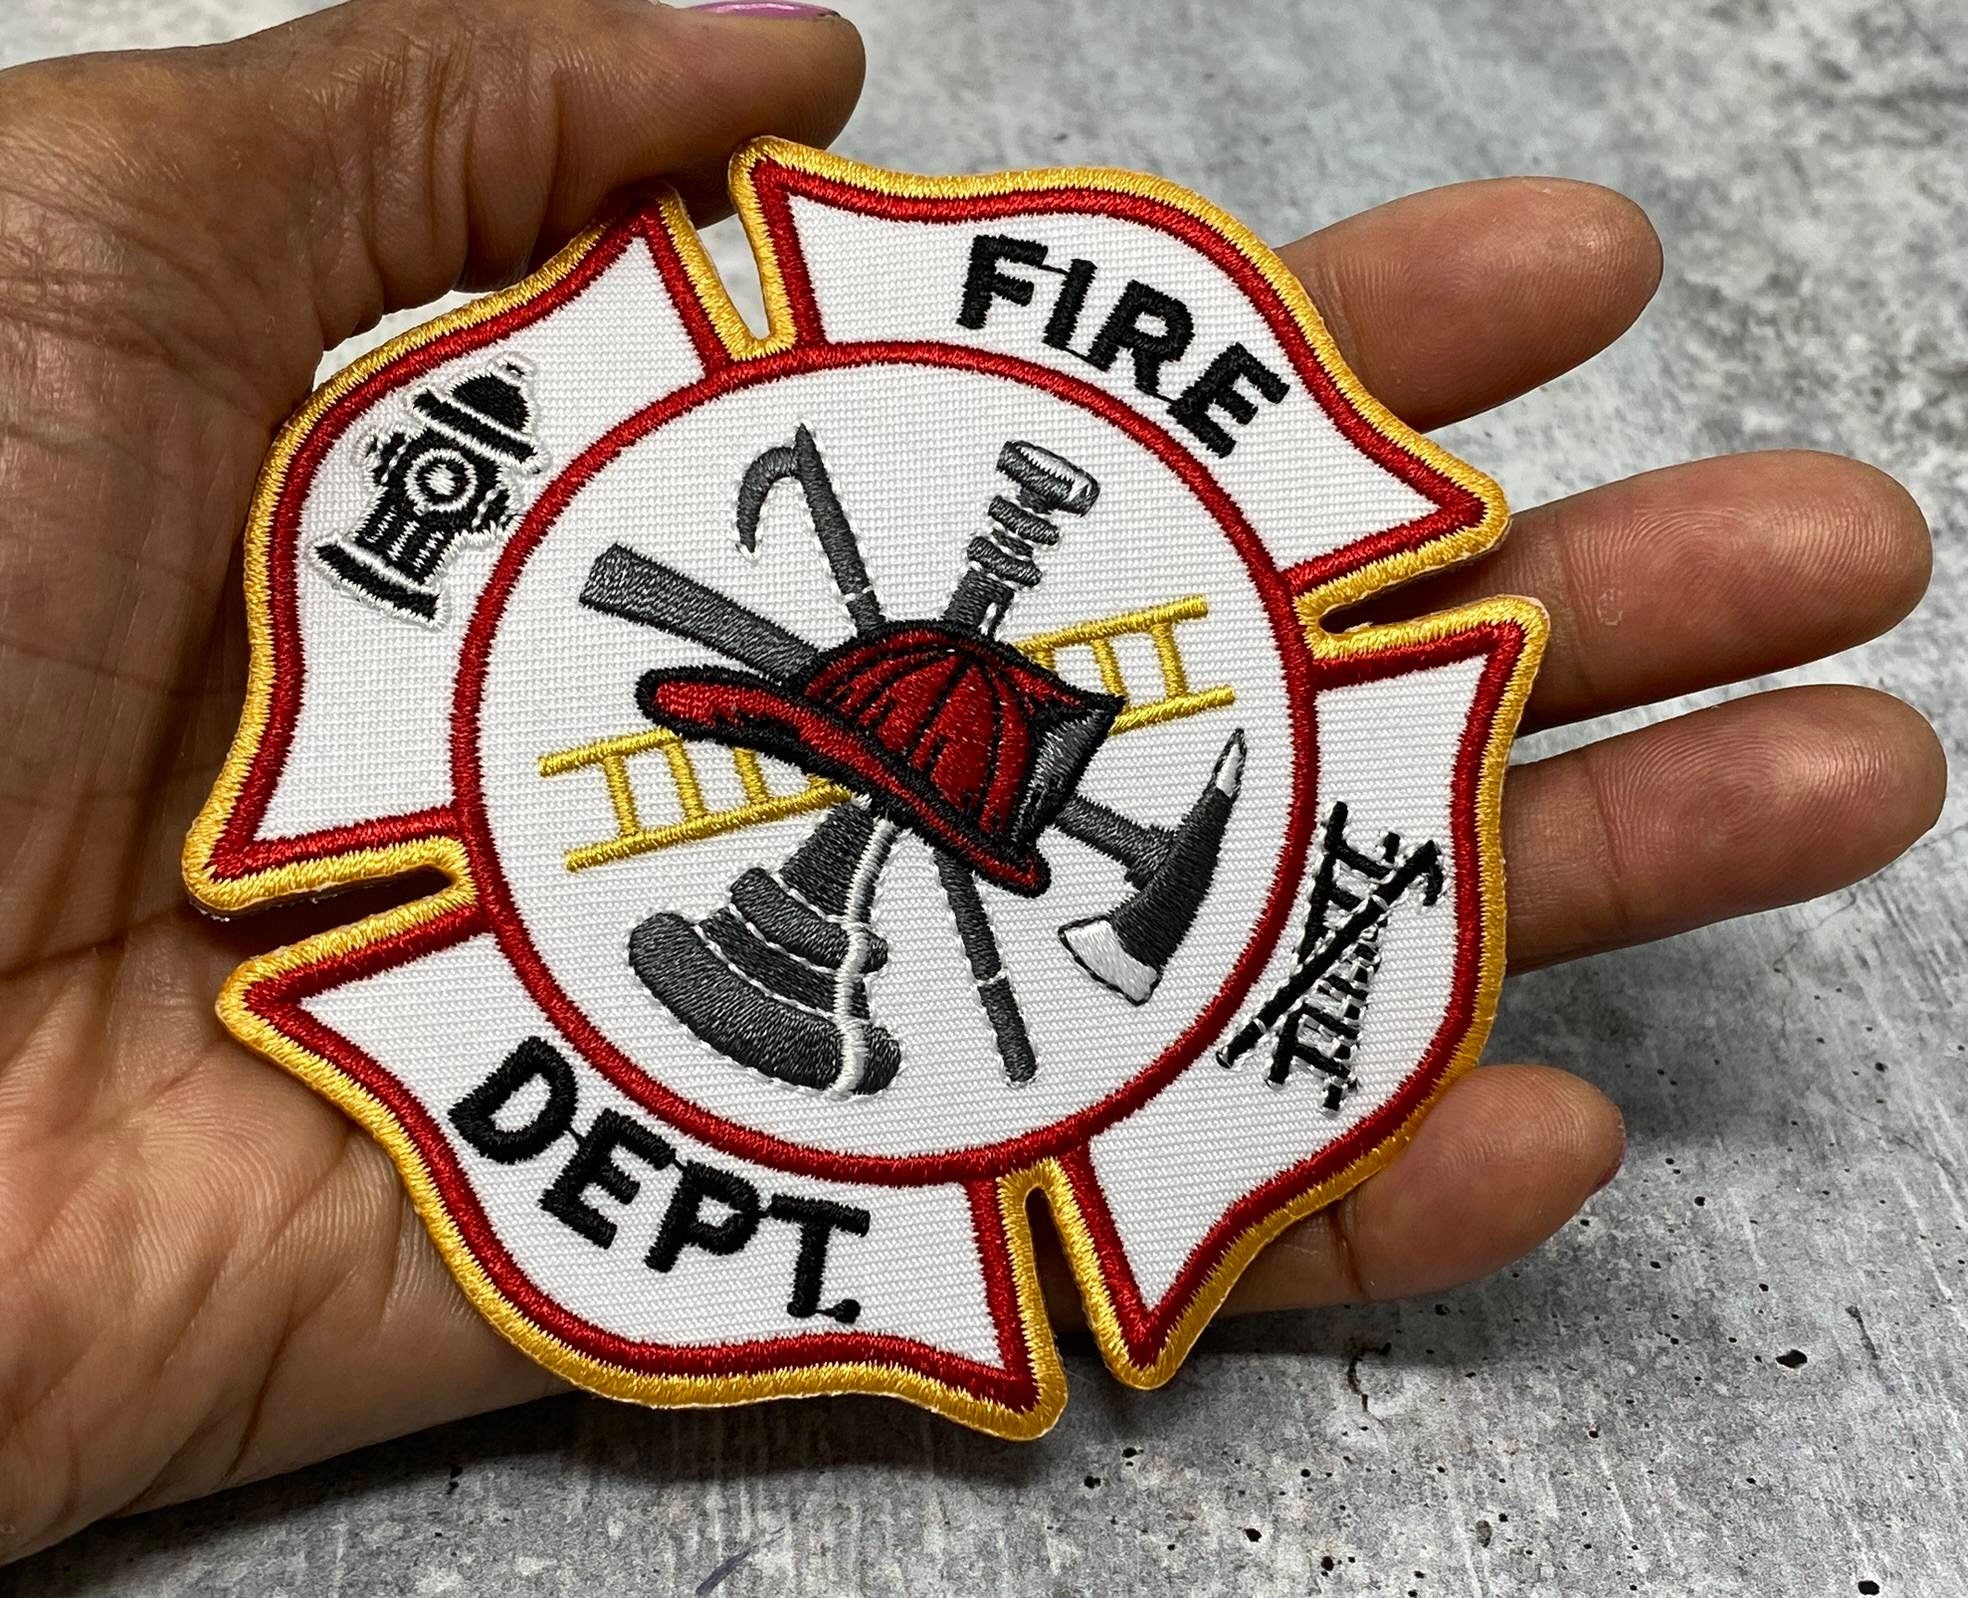 NEW Firefighter Patch, "Classic Fire Emblem," First Responder Gifts, 1-pc Iron-on Embroidered Patch, Support Badge, Patch for Clothing